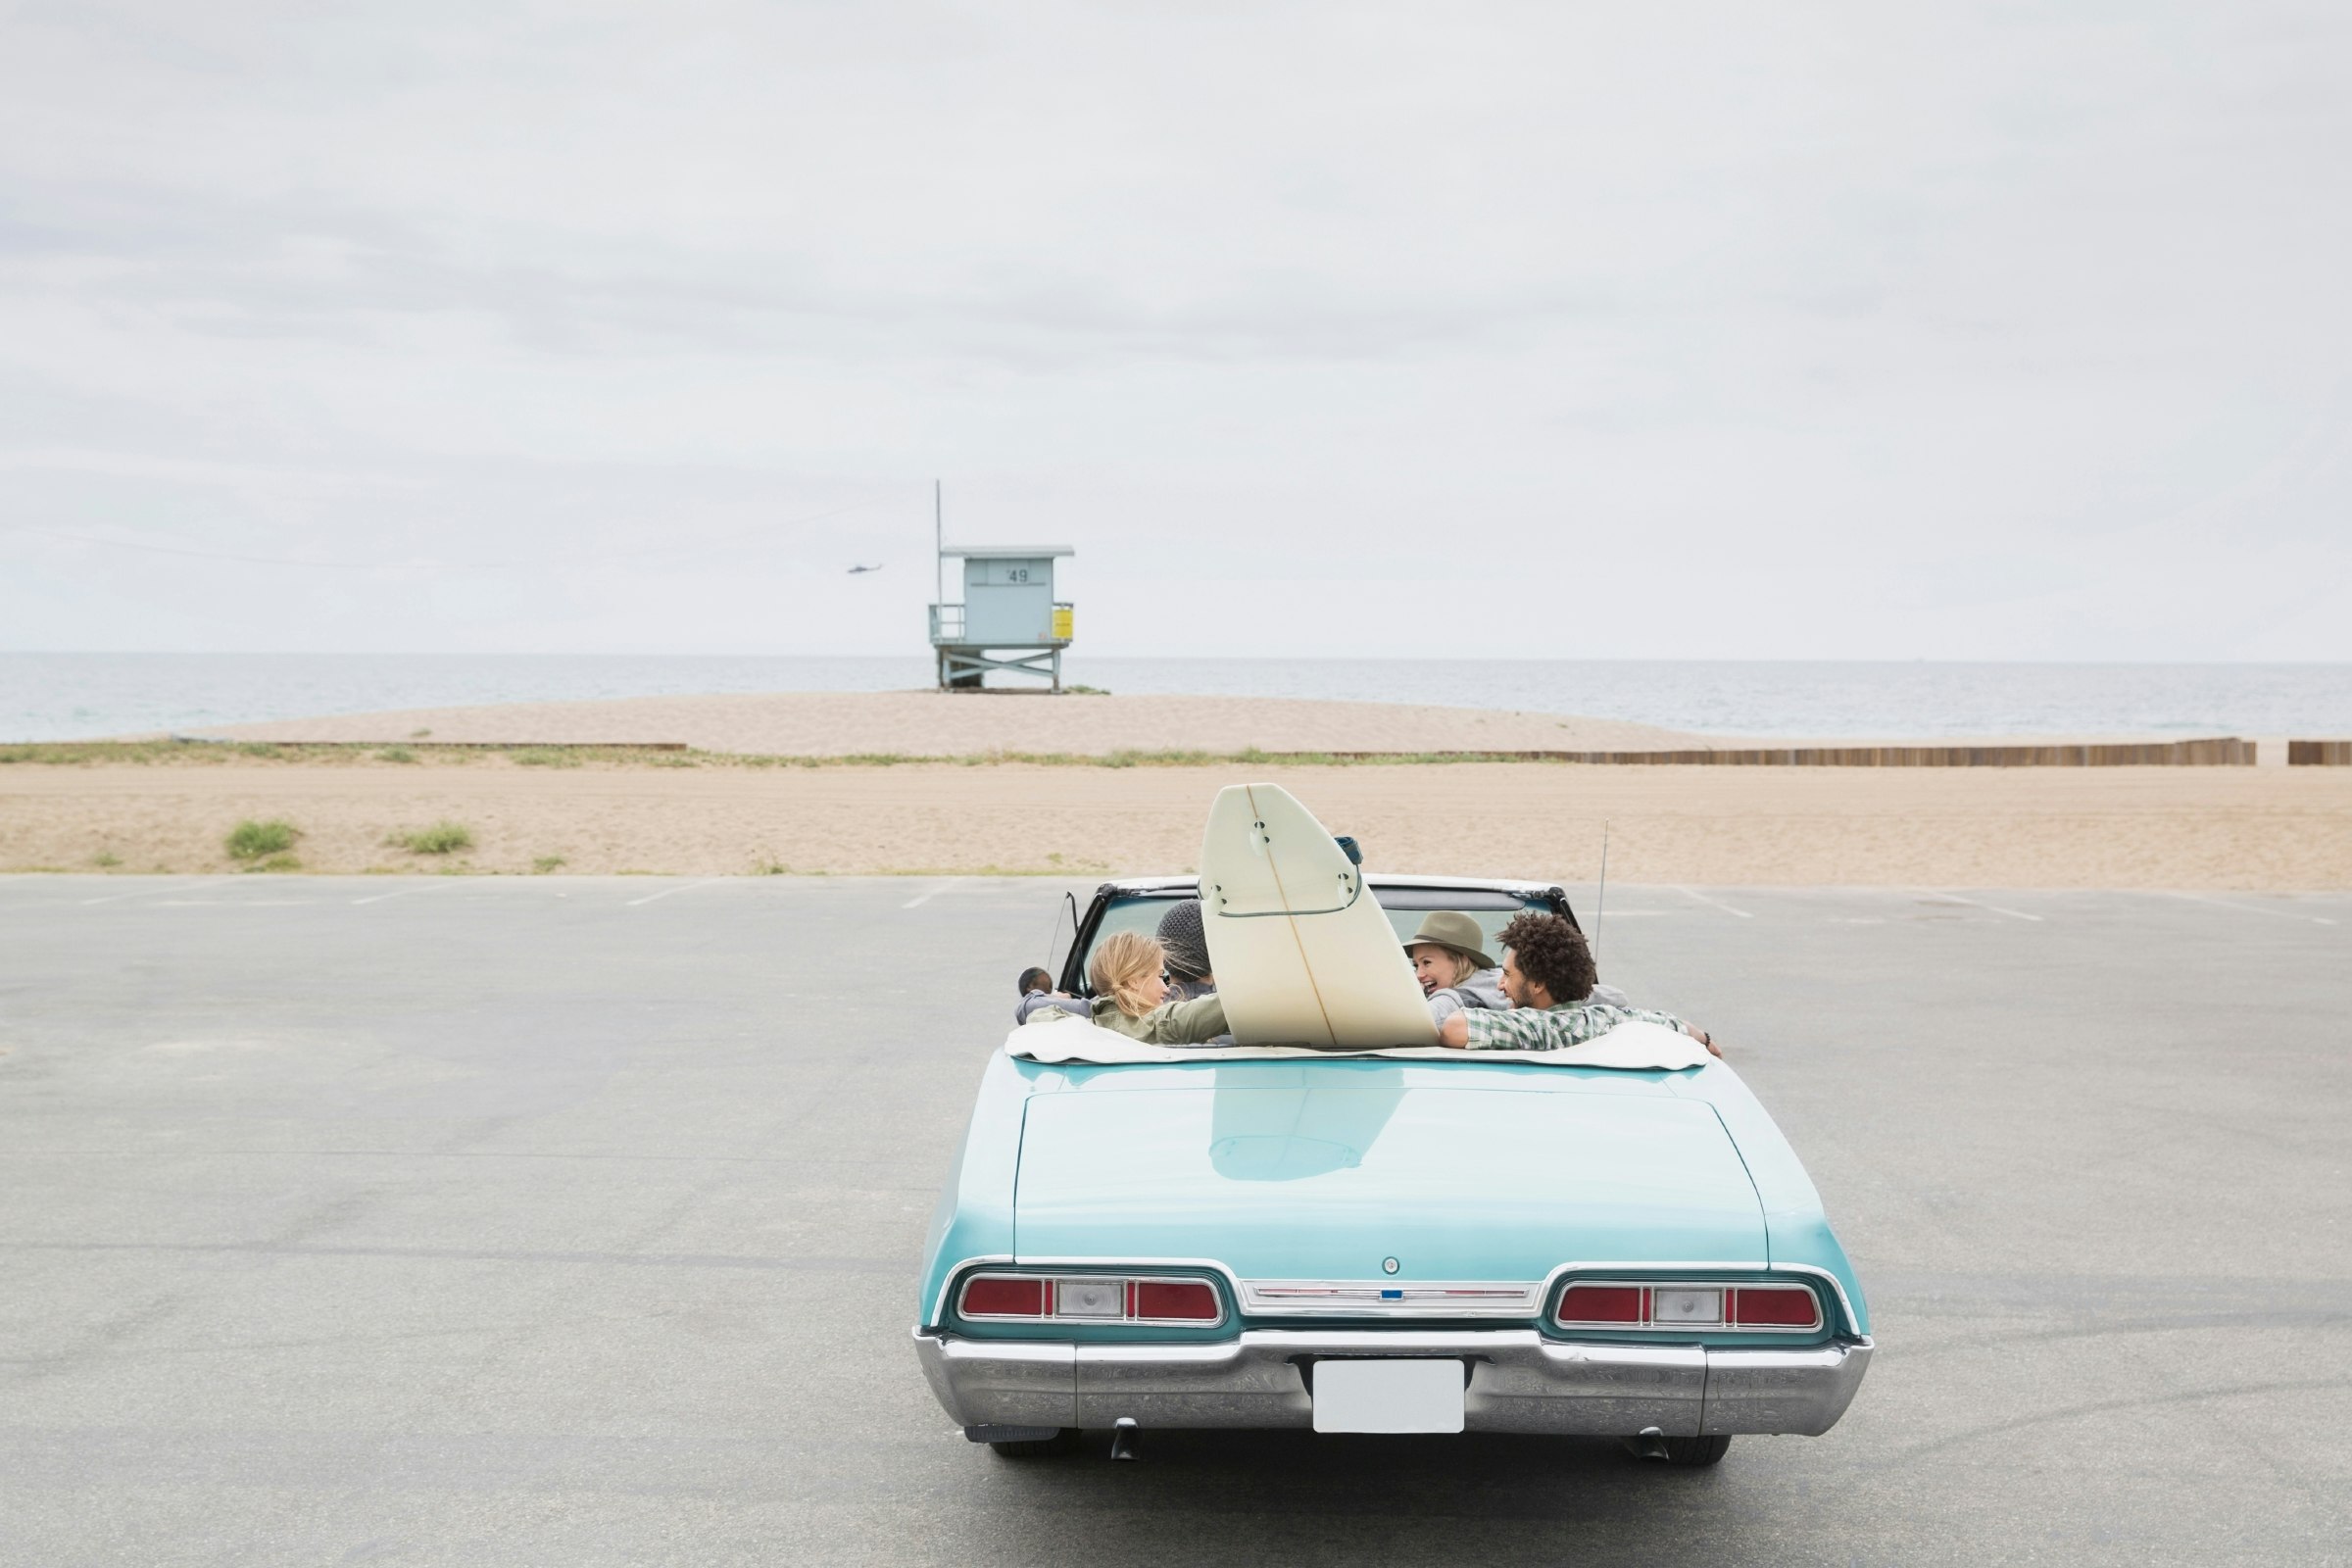 Travel News - Friends in convertible with surfboard arriving beach